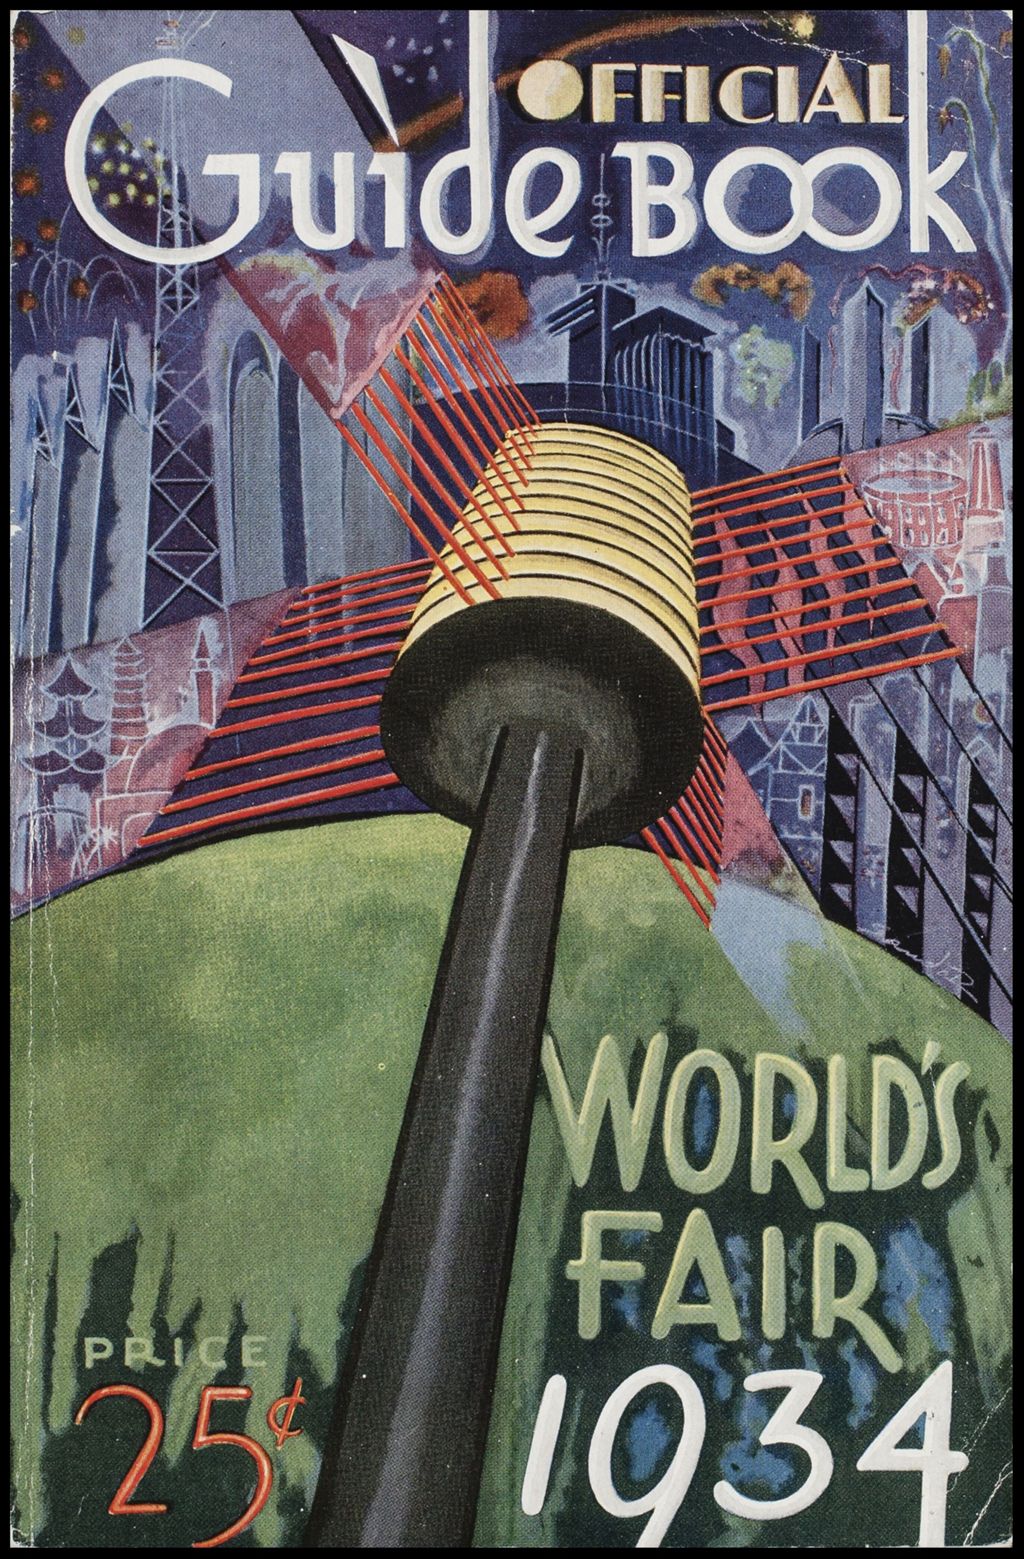 Miniature of Official Guidebook of The World's Fair, 1934 (Folder 16-176)